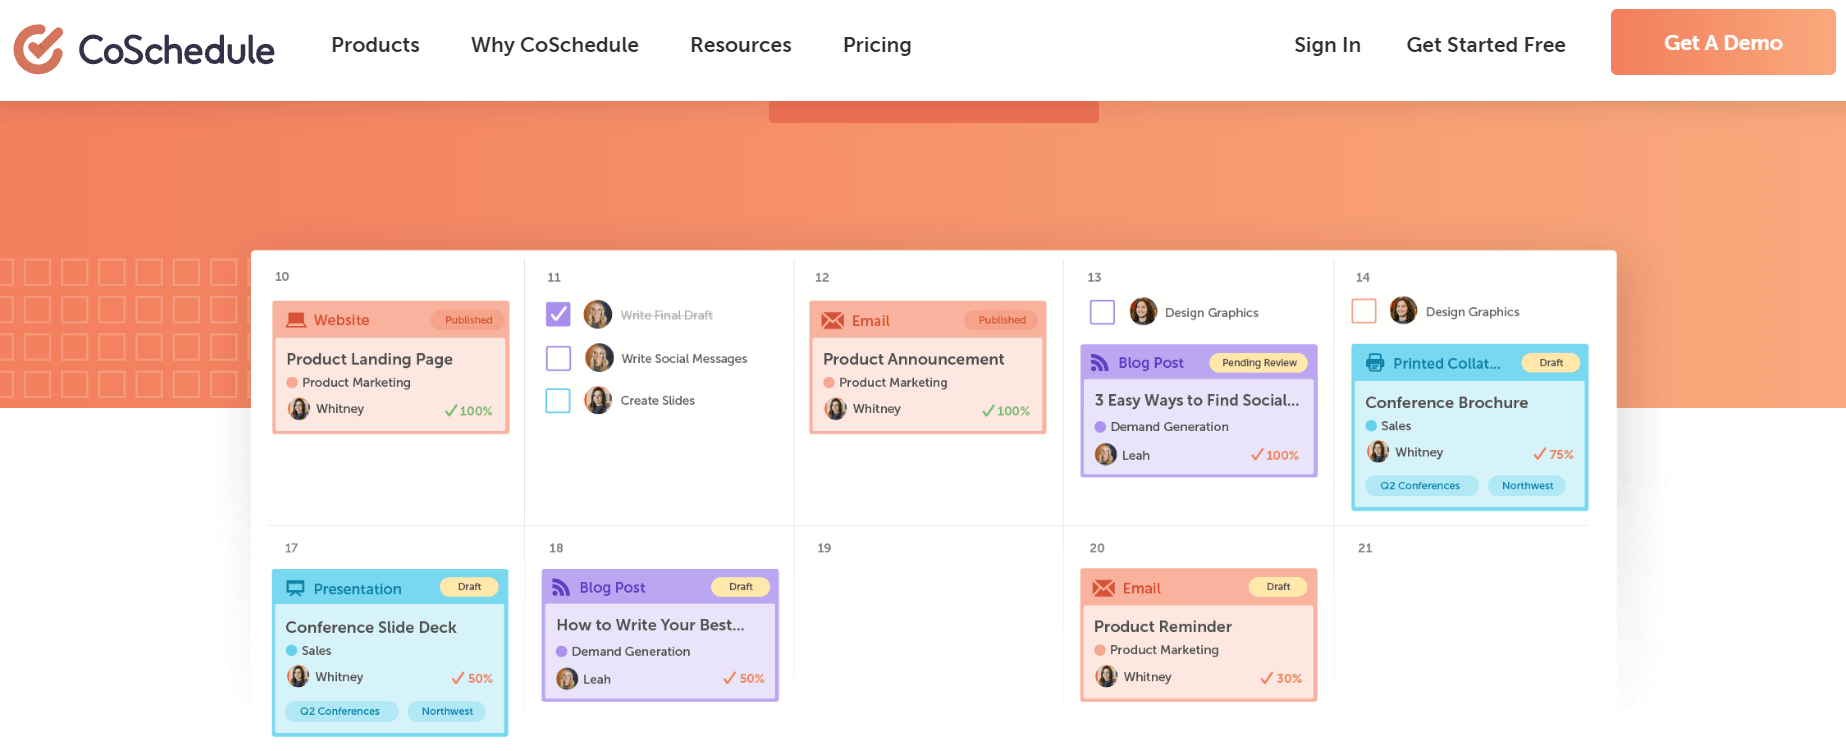 The CoSchedule content calendar can help your remote work business model. 